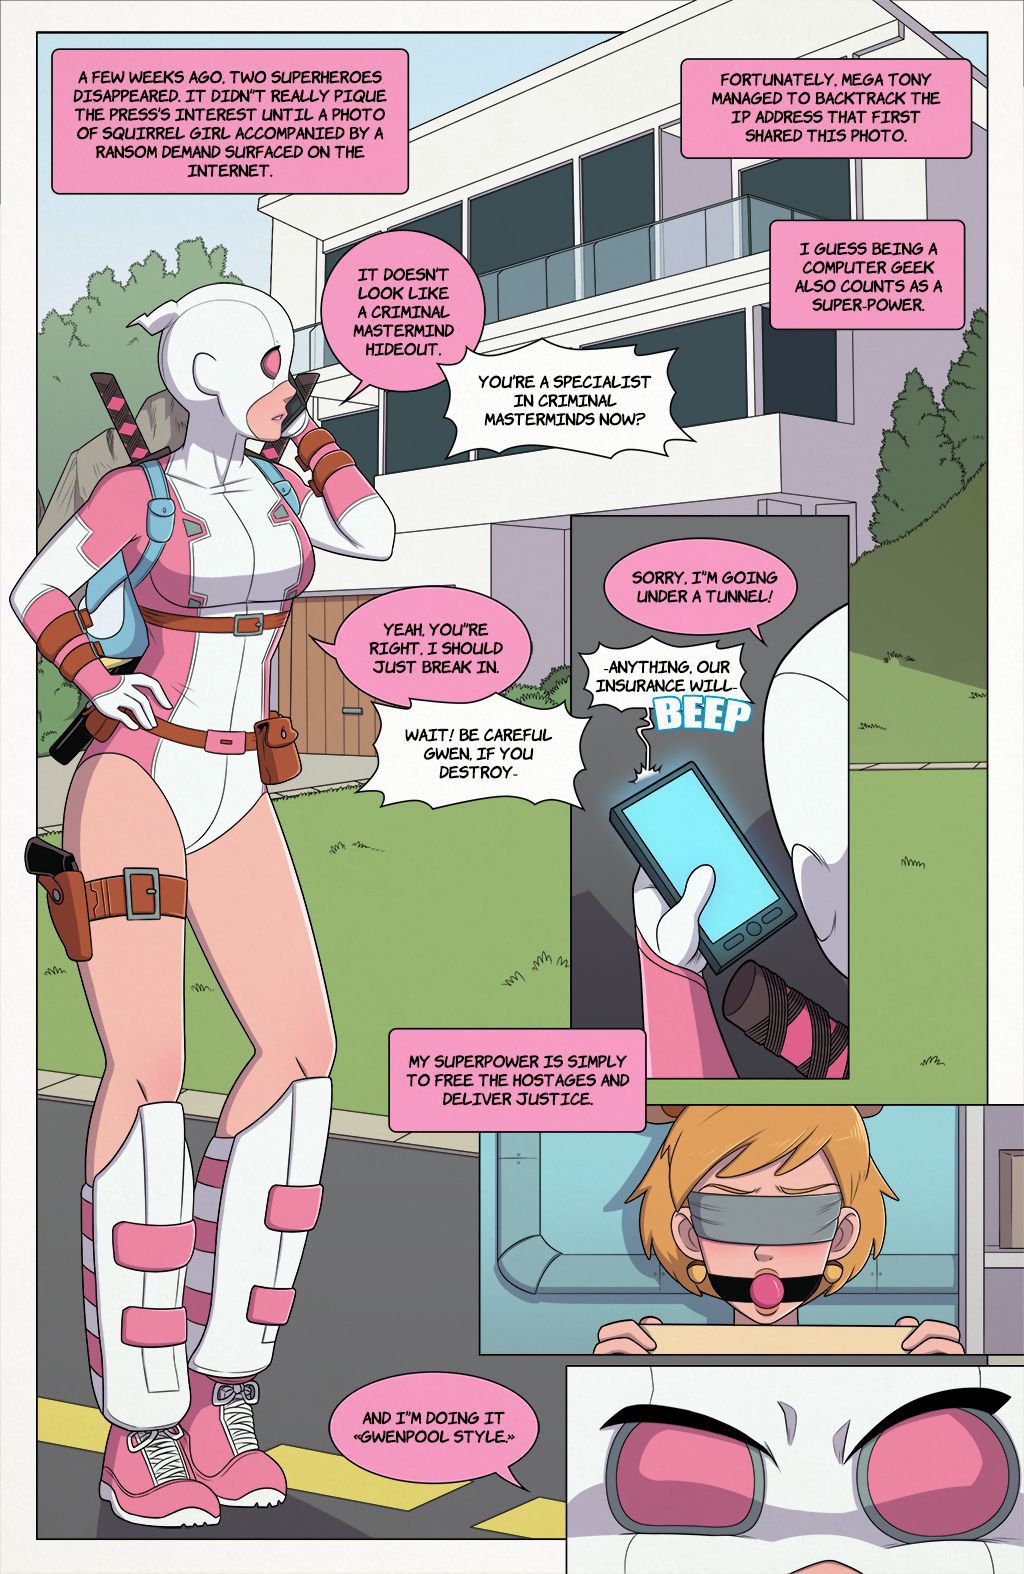 [PieceofSoap] Shits and Giggles (Gwenpool) [Ongoing] 3